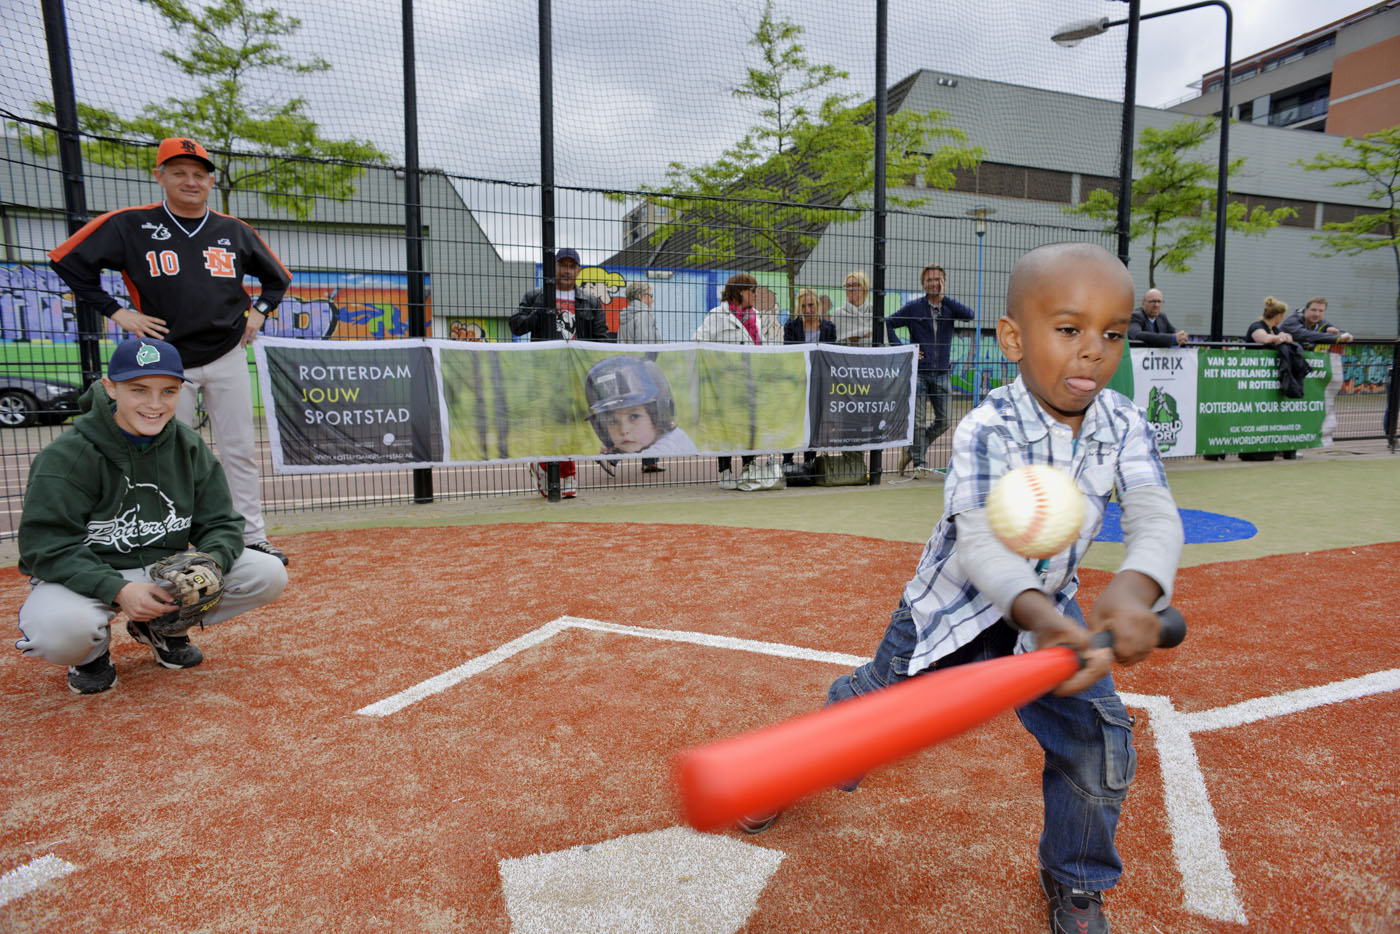 Equipment is also provided at the facility, allowing all children to get involved in the sports